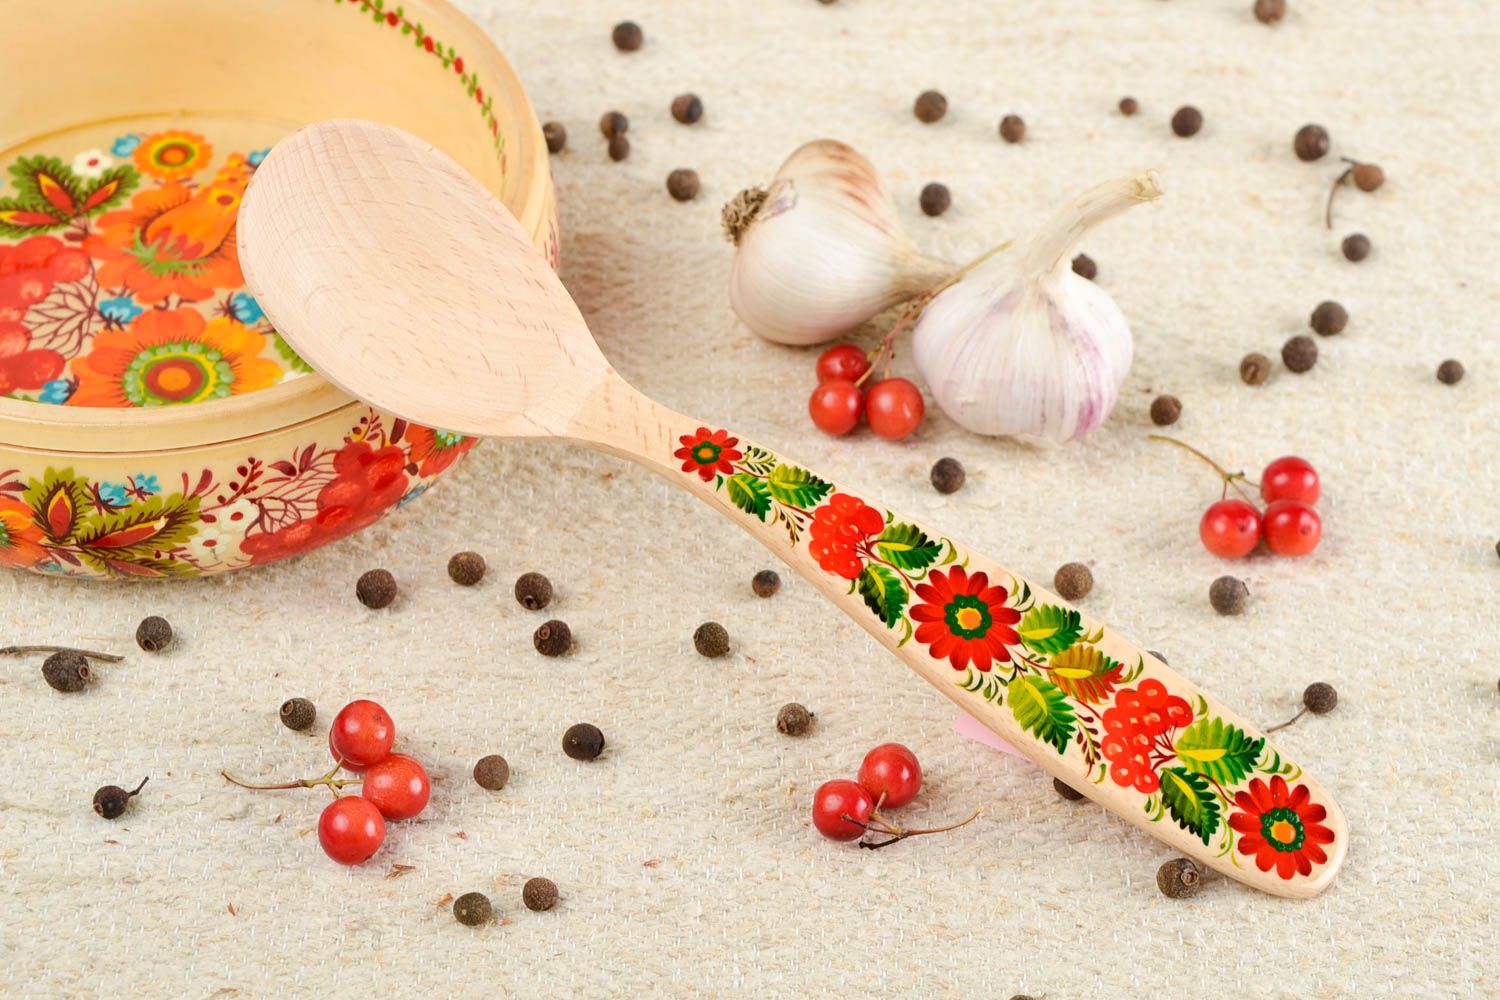 Handmade cute wooden spoon stylish painted spoon unusual kitchen accessory photo 1